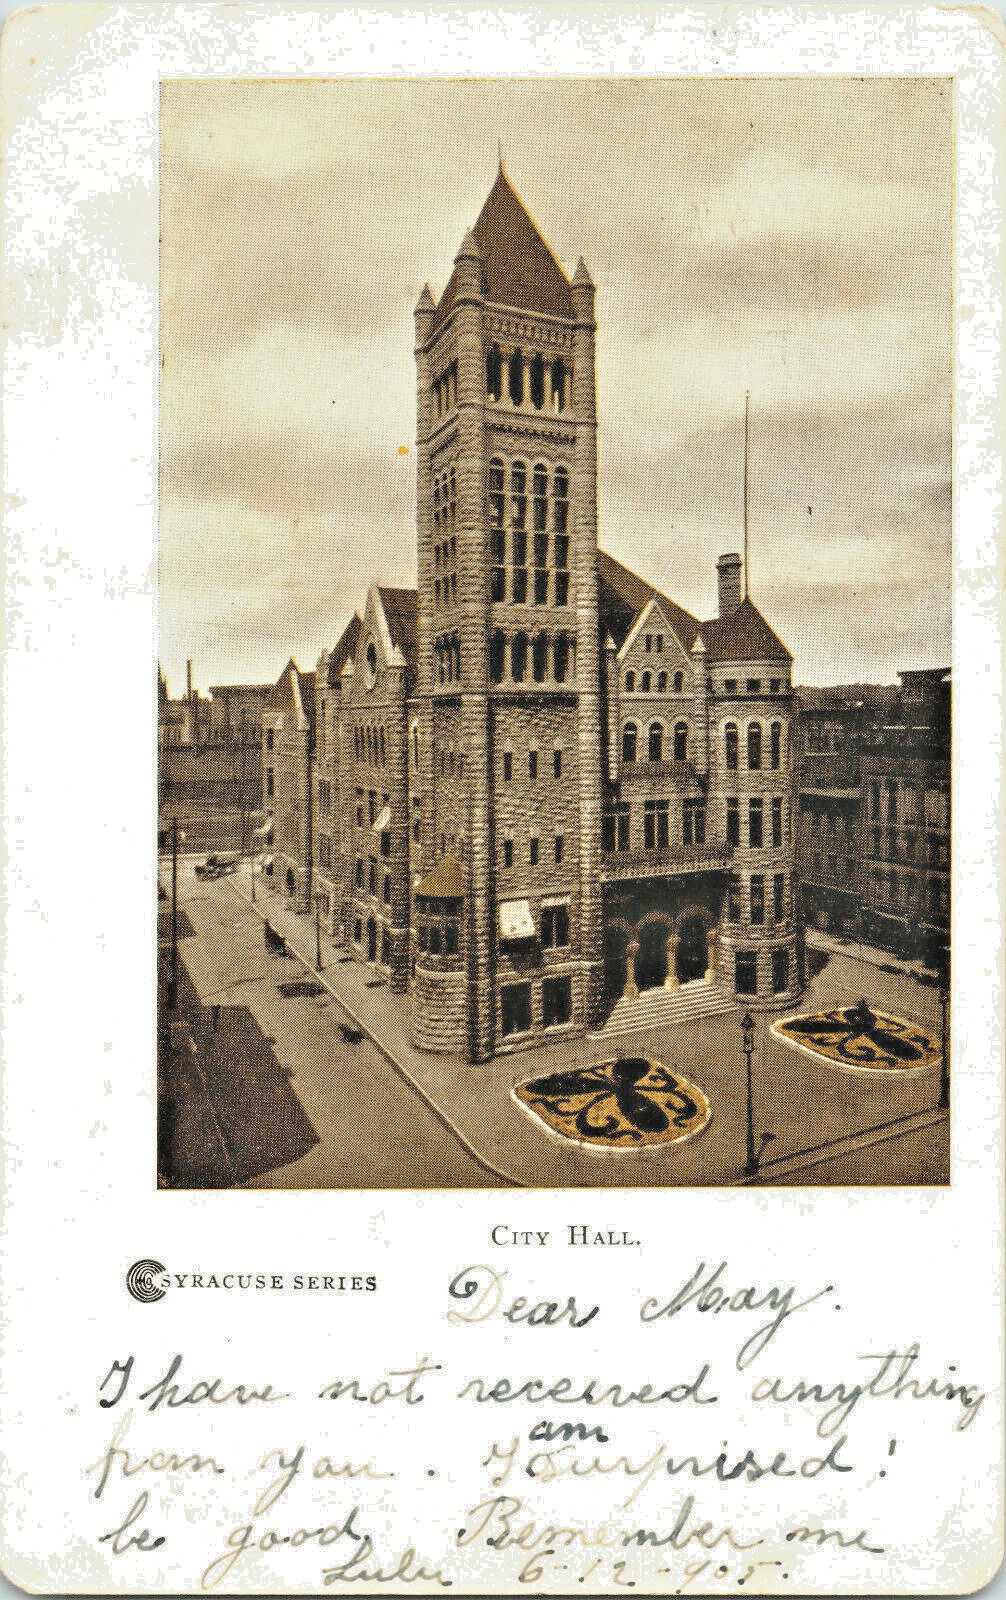 1905 CITY HALL VINTAGE REAL PHOTO POSTCARD, ITHACA, NEW YORK MARY BOOK